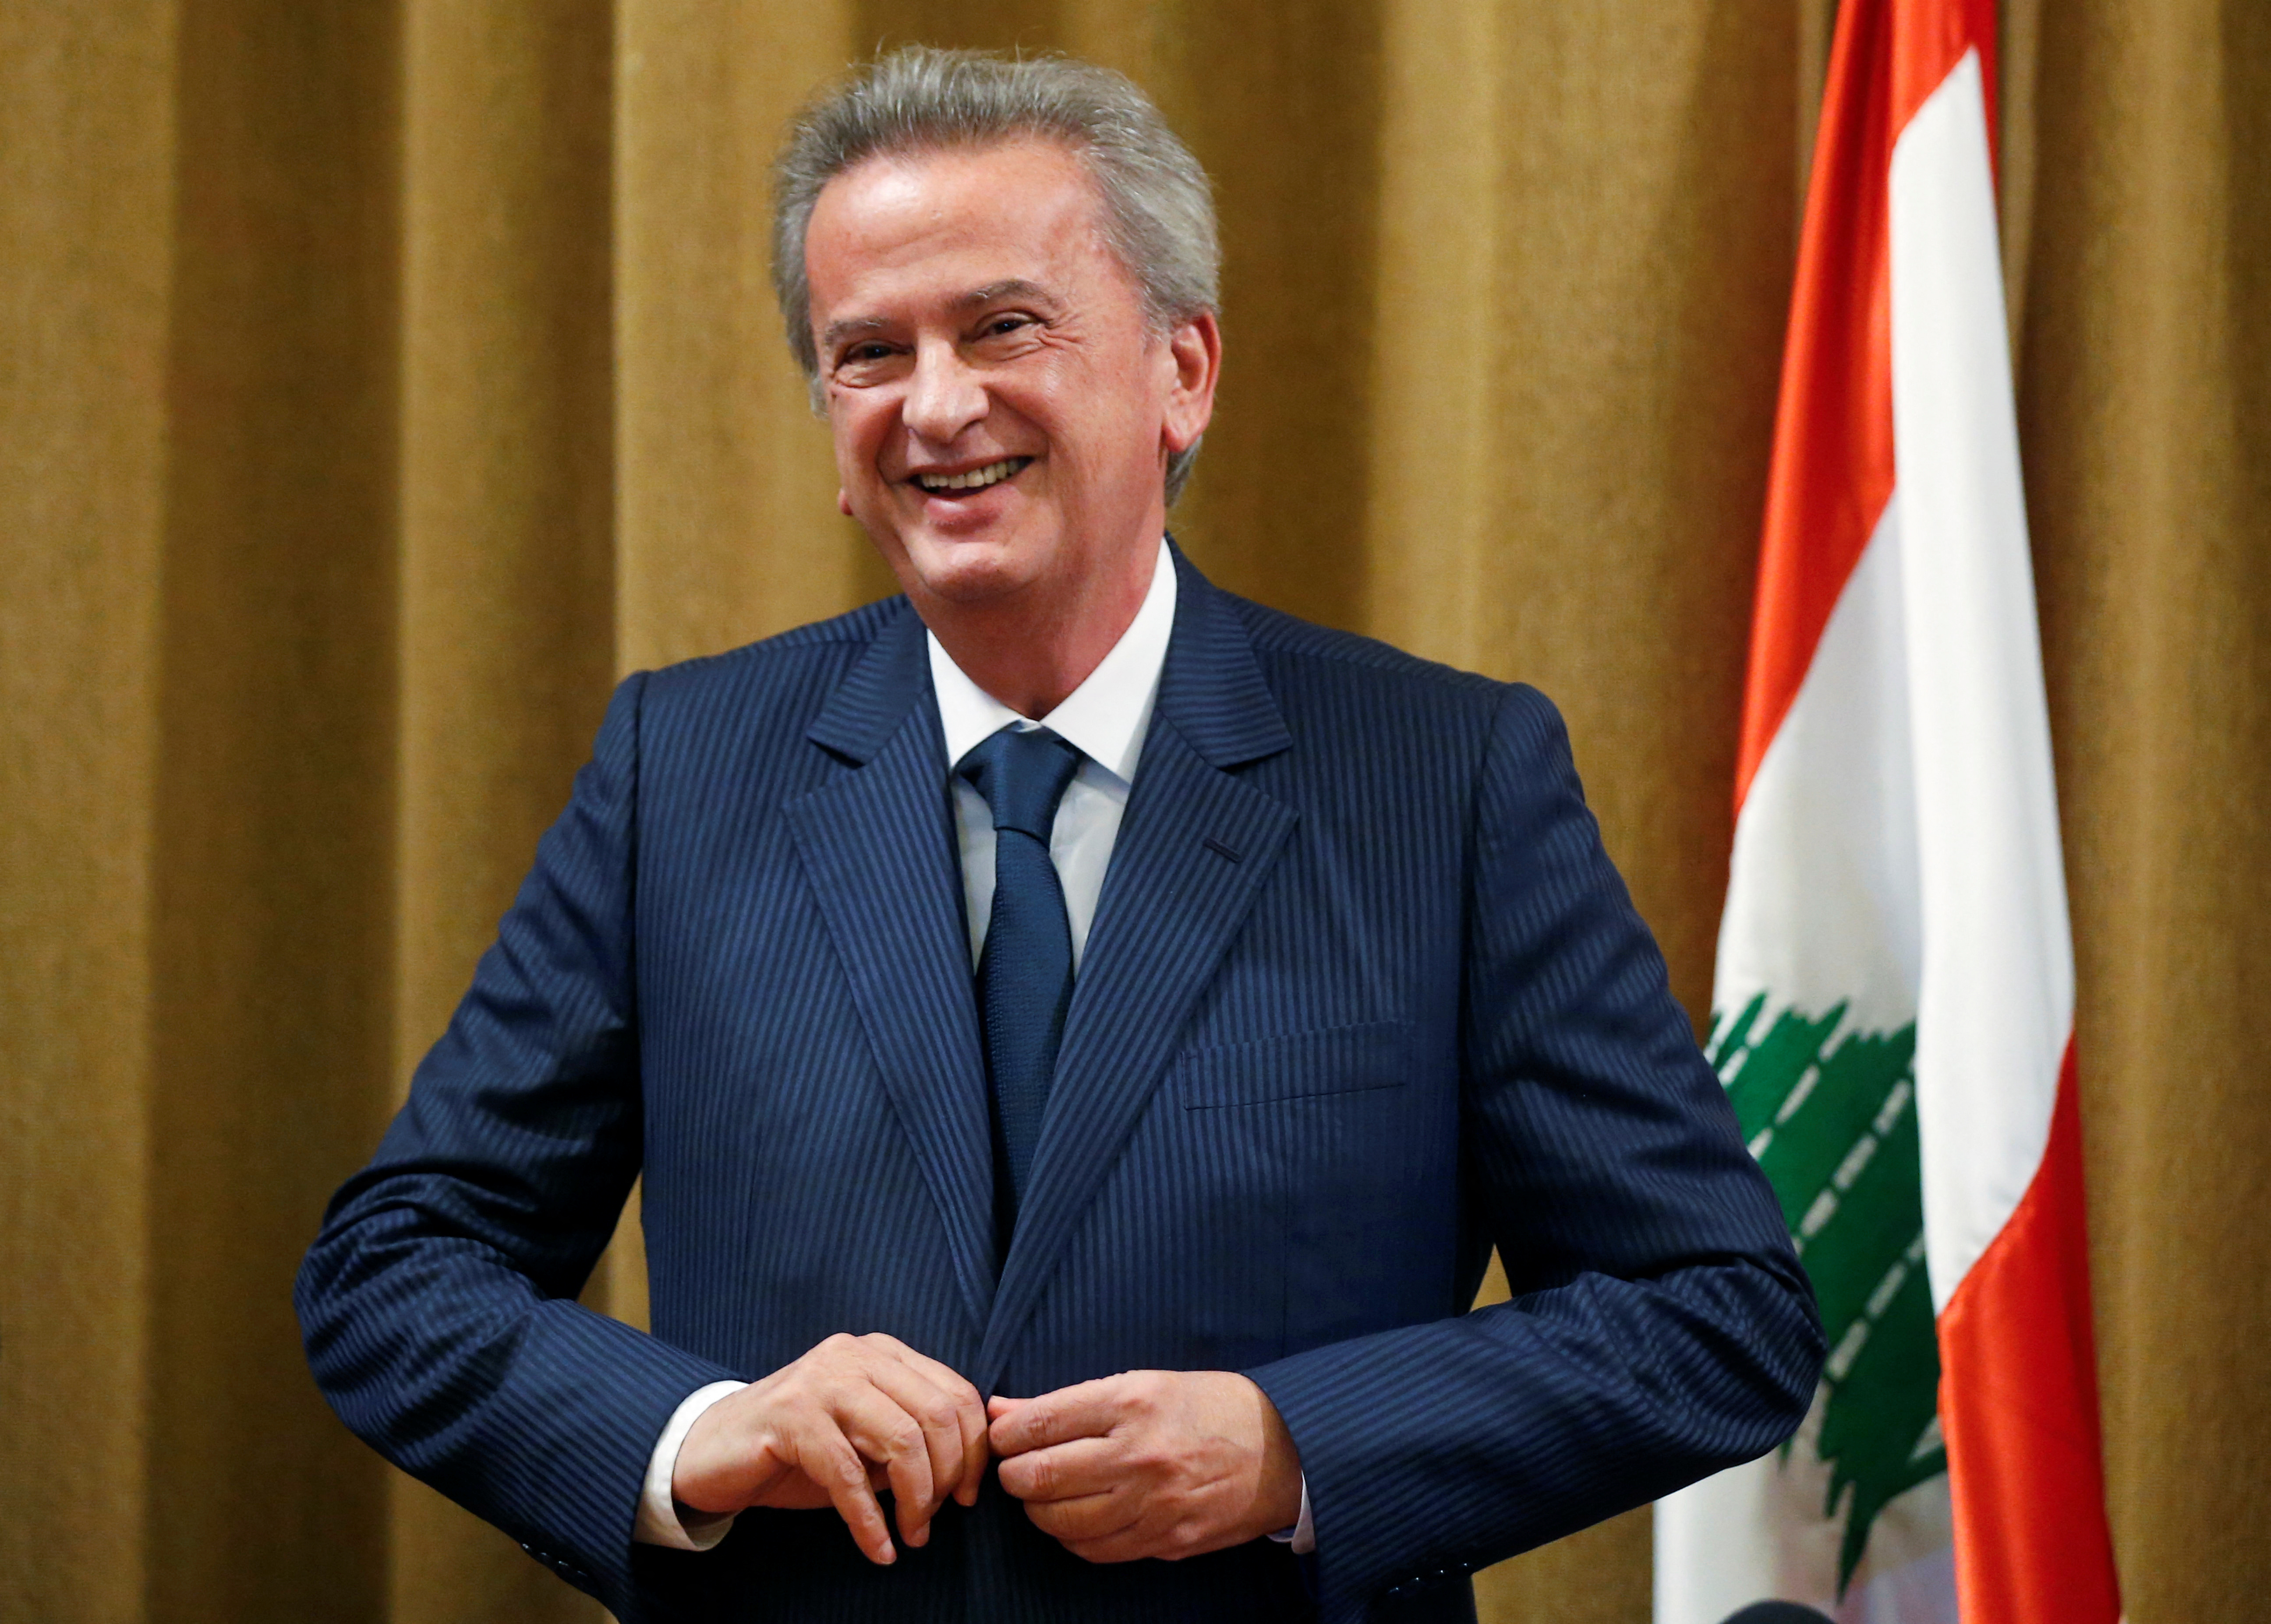 Lebanon's Central Bank Governor Riad Salameh reacts after a news conference at Central Bank in Beirut